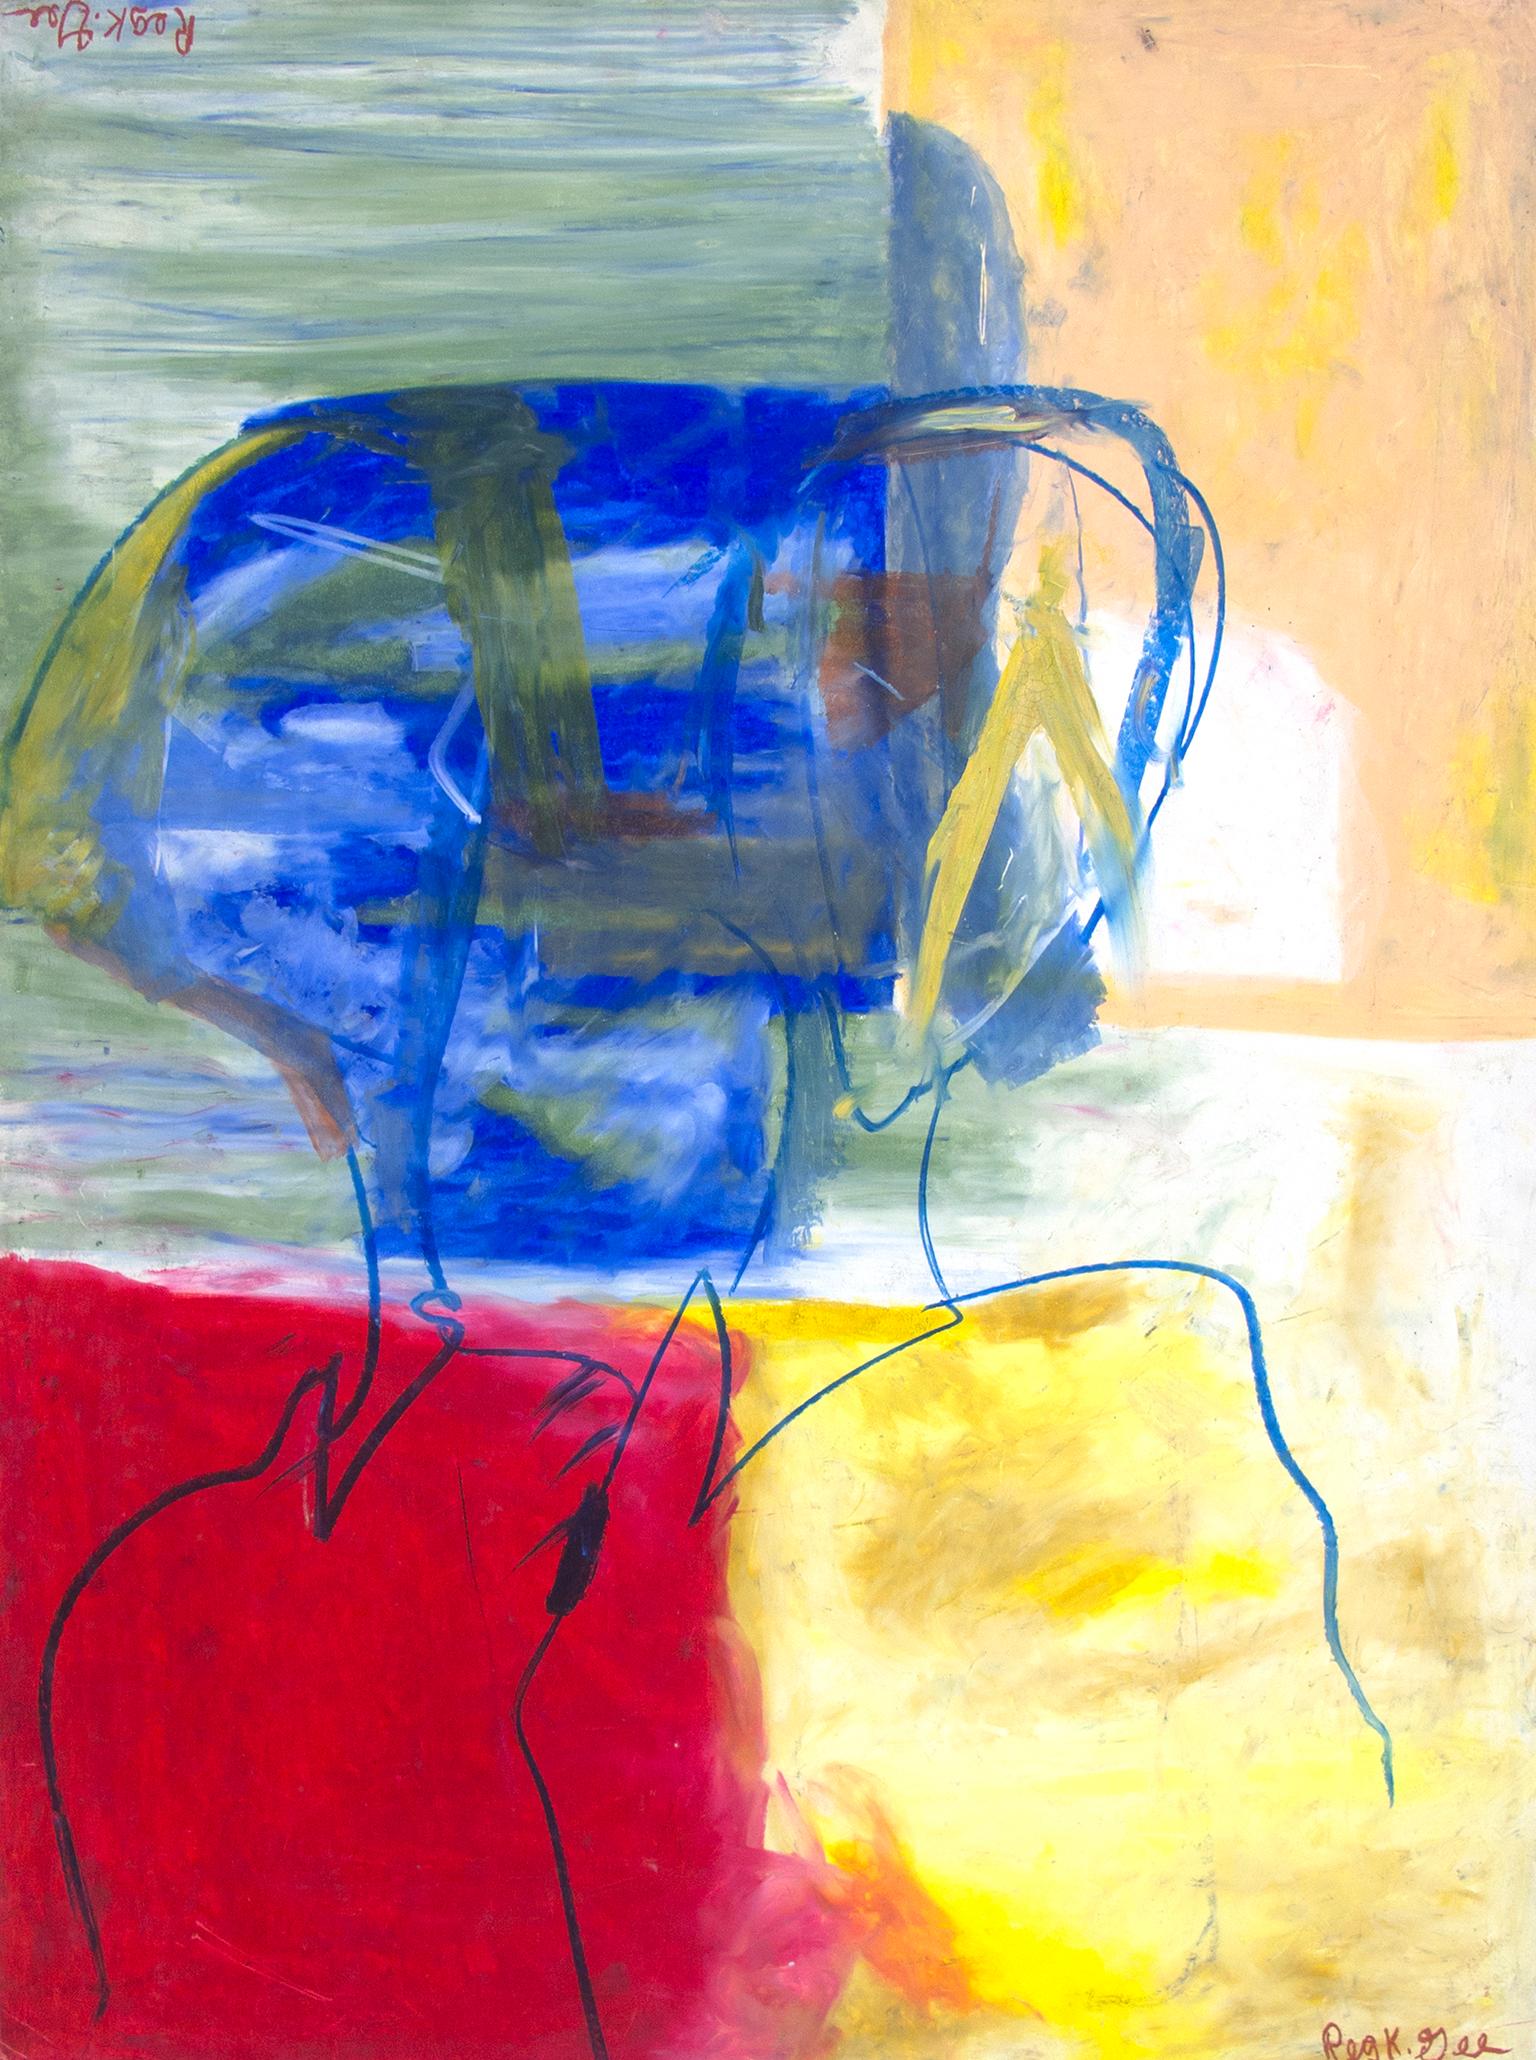 "Upside Down Couple Strolling to Lunch" is an original oil pastel drawing on illustration board by Reginald K. Gee. The artist signed the piece lower right and upper left. This piece features two abstracted figures over bright, bold colors--blue,